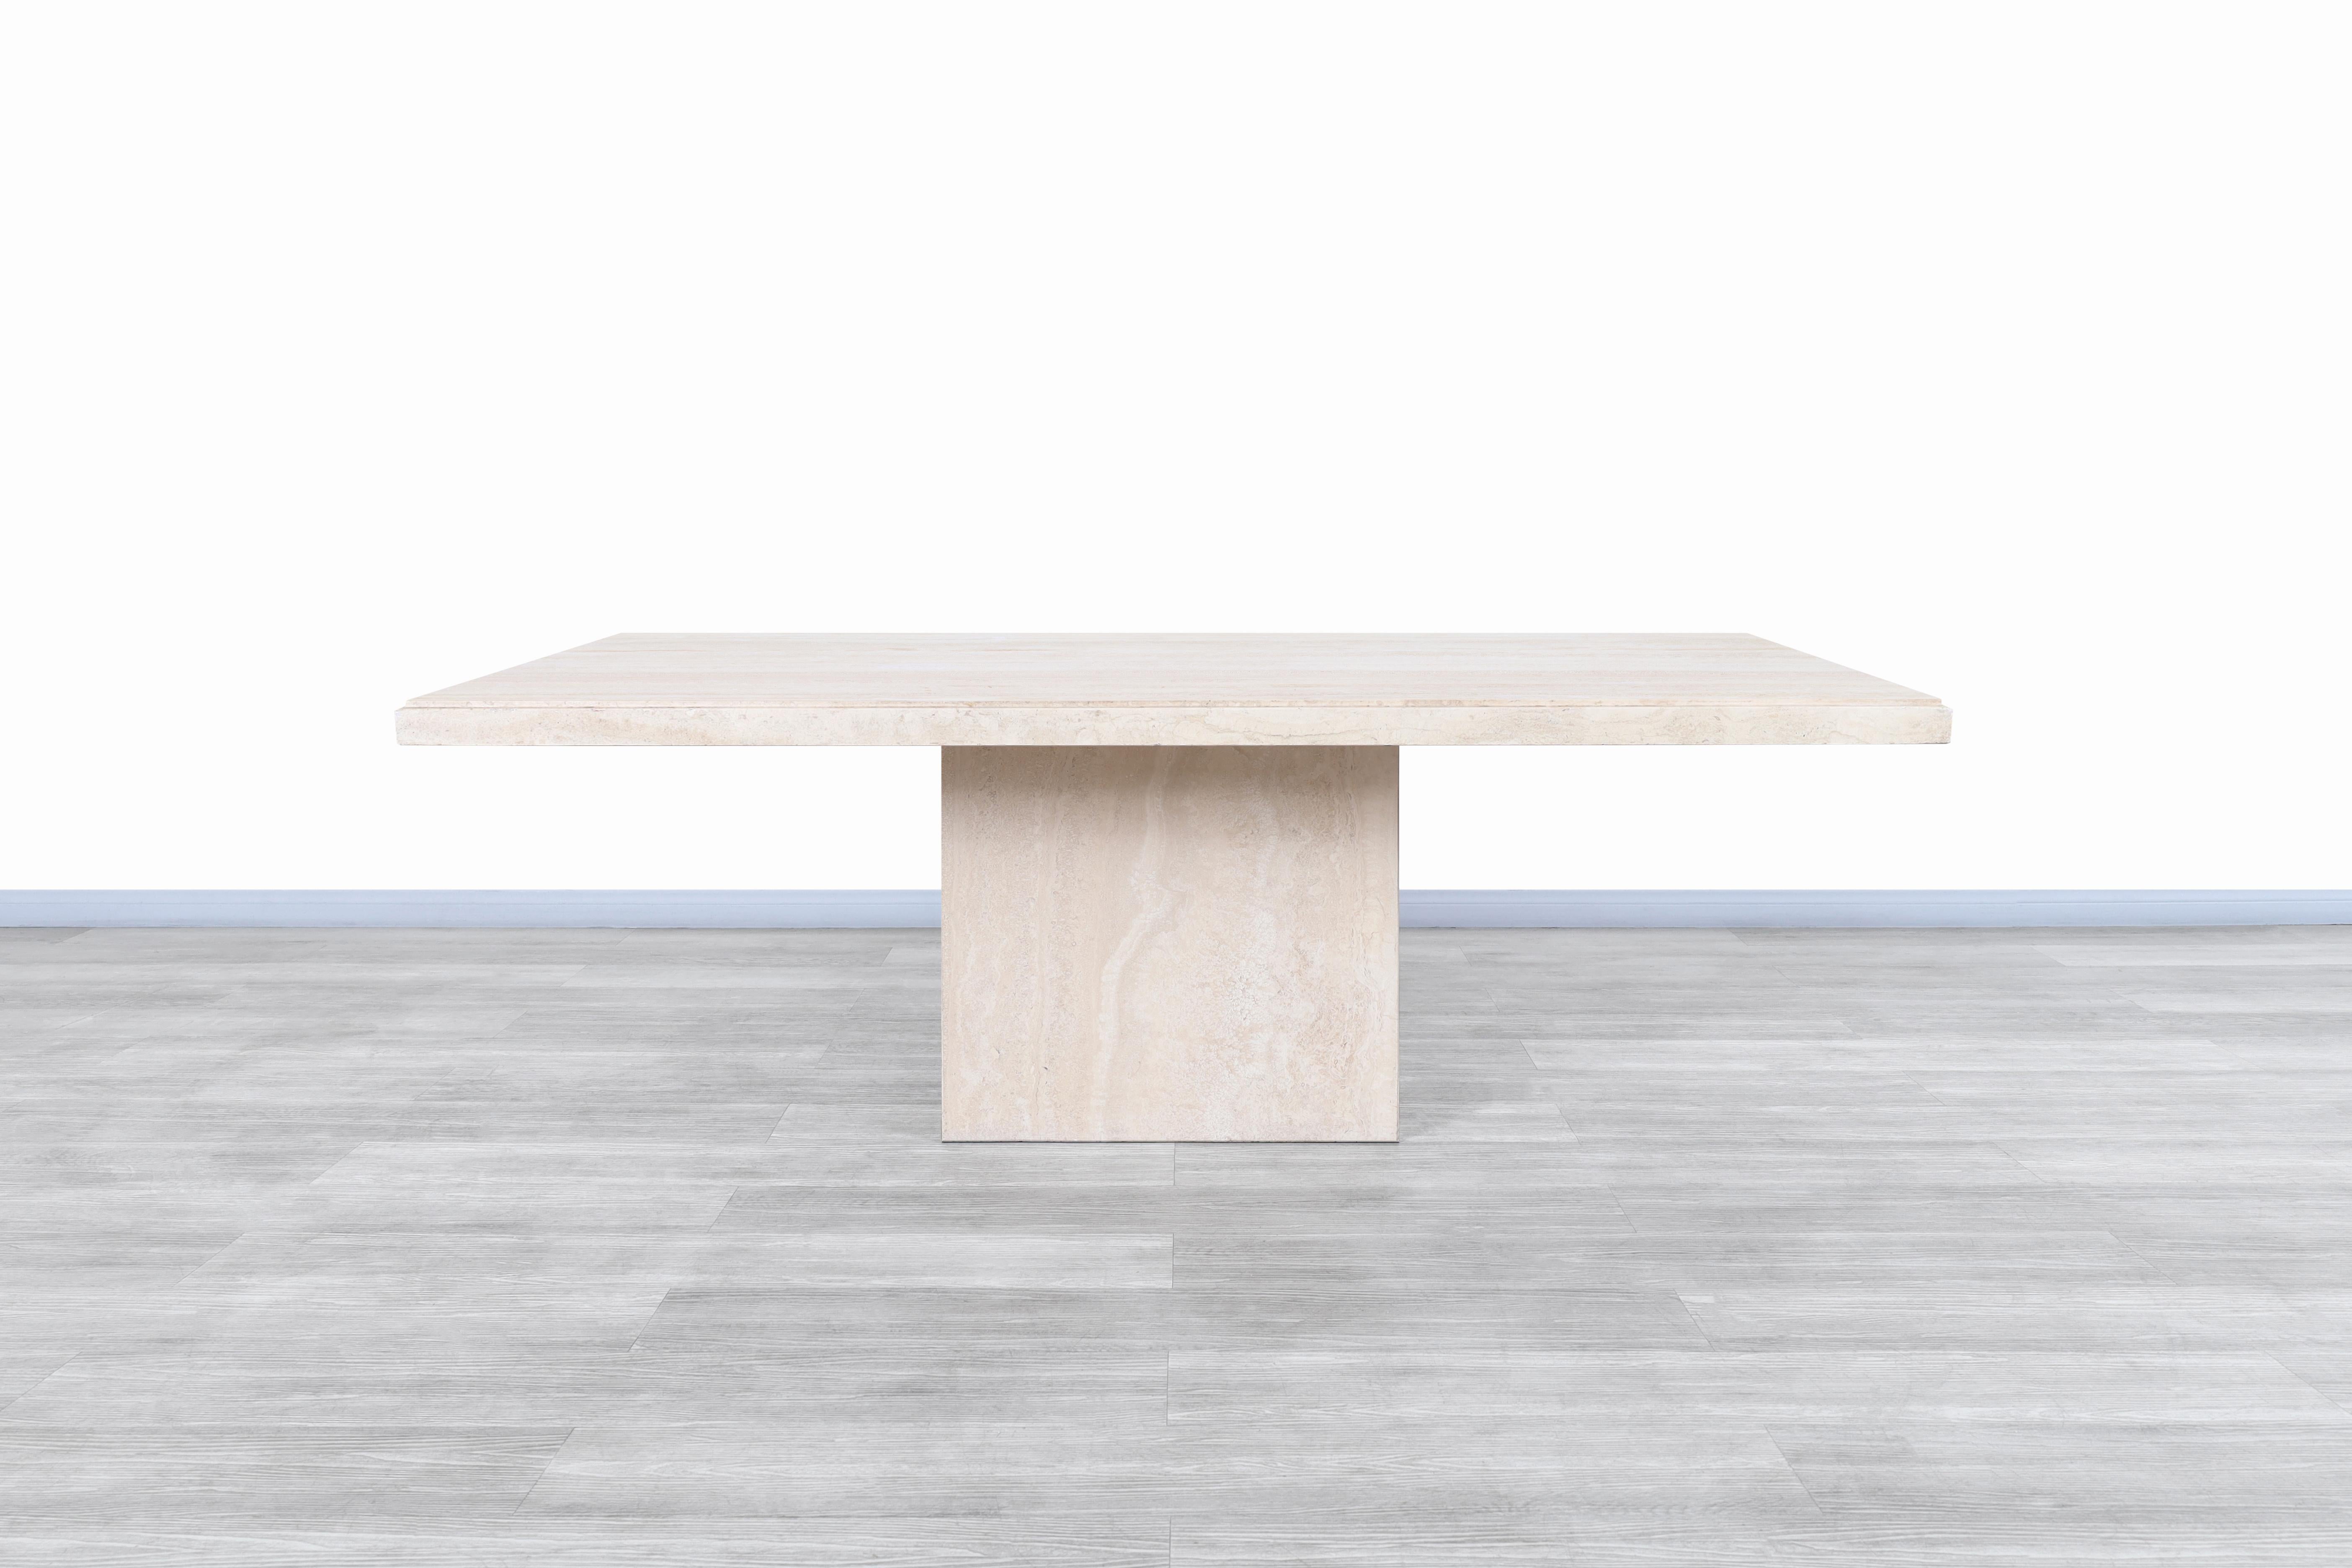 Exceptional vintage modernist travertine dining table / conference table manufactured in Italy, circa 1970s. This table features a gorgeous rectangular travertine top that sits over an extremely sturdy base and is complemented by the natural